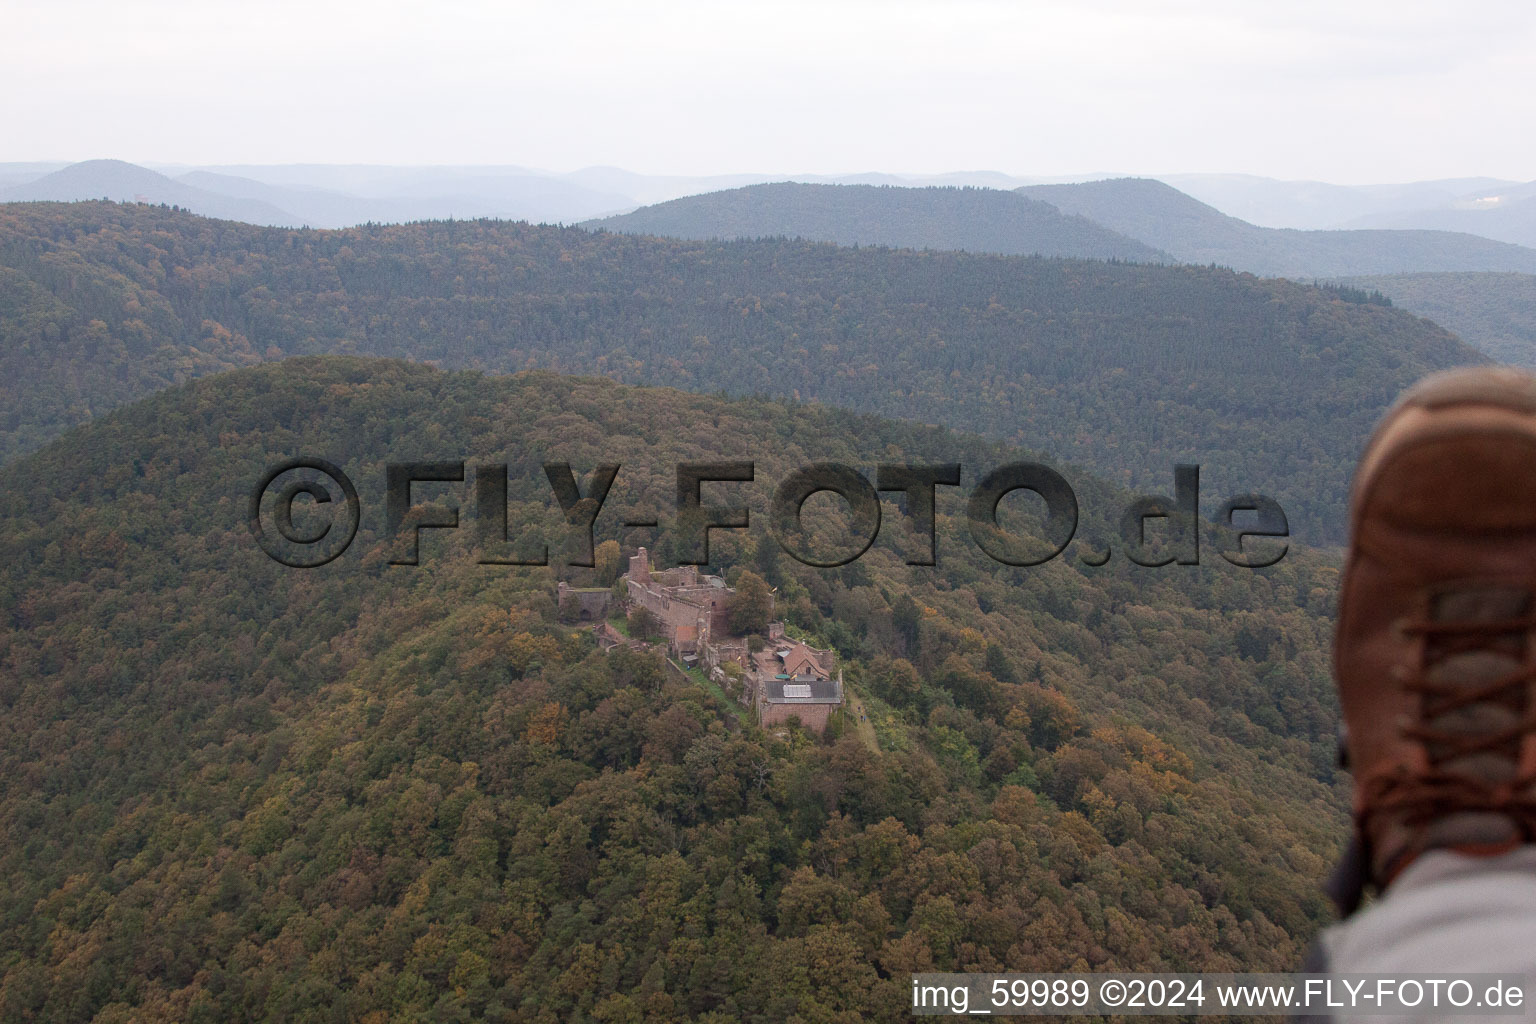 Madenburg in Eschbach in the state Rhineland-Palatinate, Germany from above